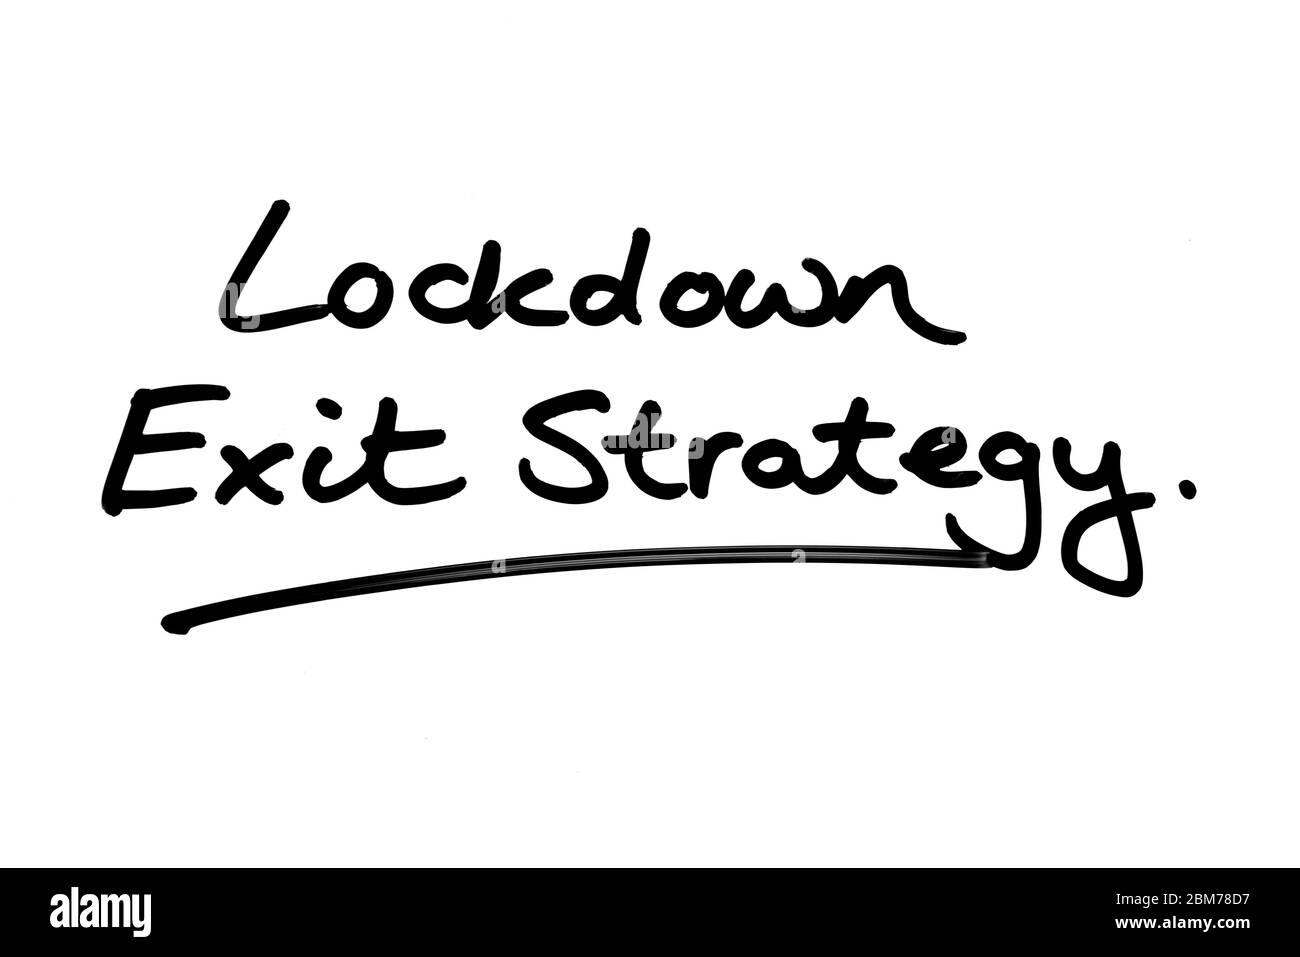 Lockdown Exit Strategy handwritten on a white background. Stock Photo